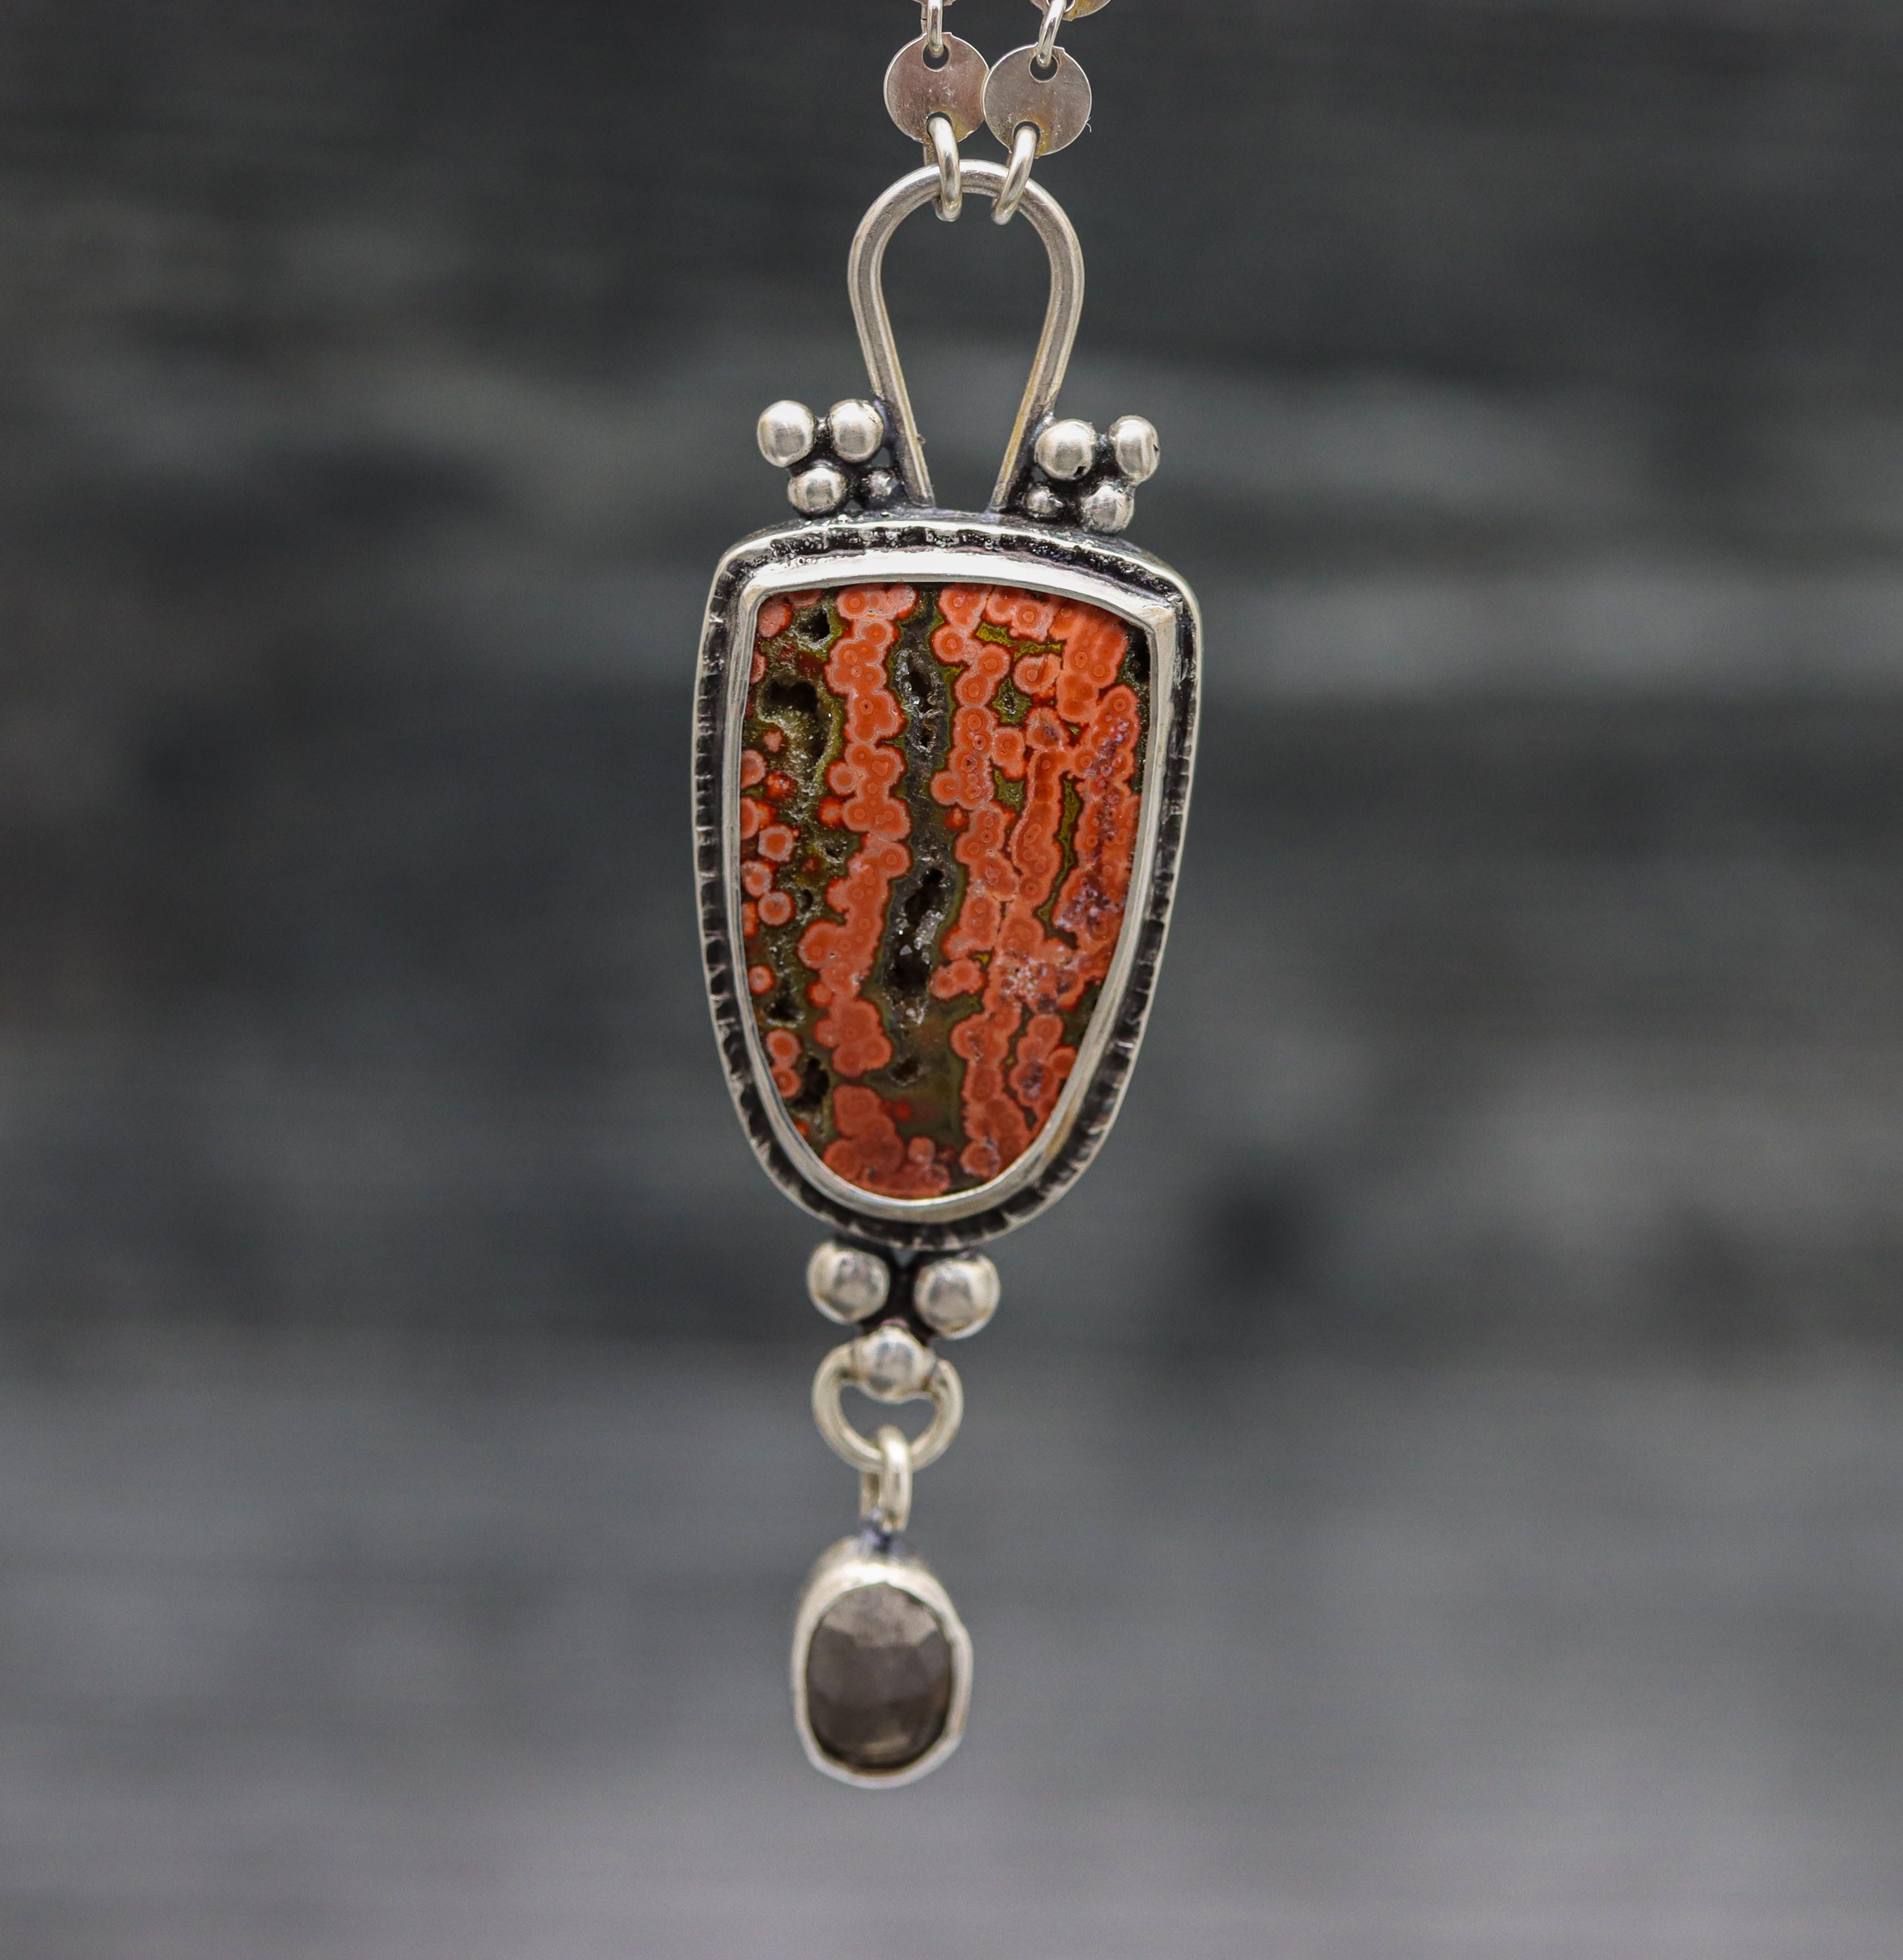 Orbicual Jasper and Agni Manitite Pendant Sterling Silver One Of a Kind Gemstone Necklace